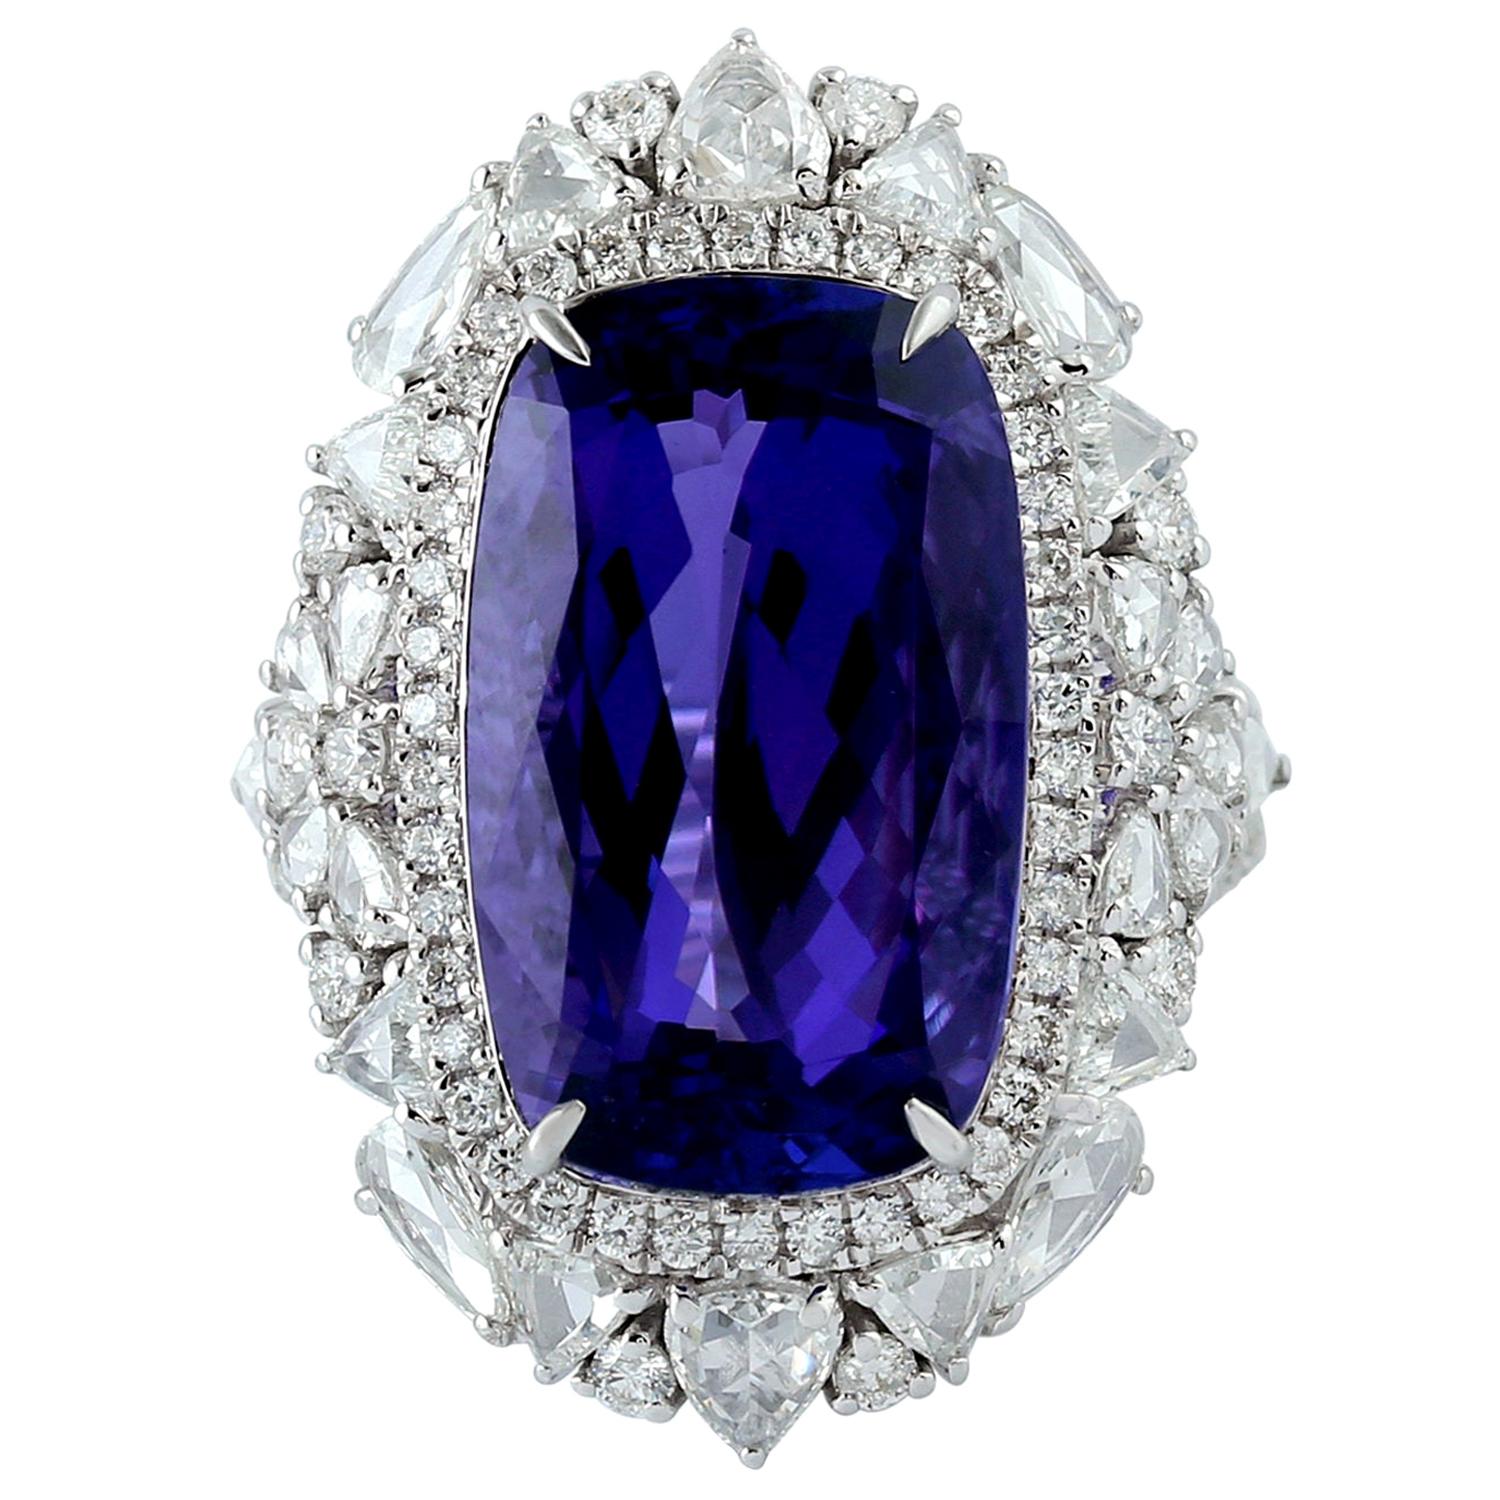 Cushion Shape Tanzanite Ring With White Diamonds In 18K White Gold For Sale